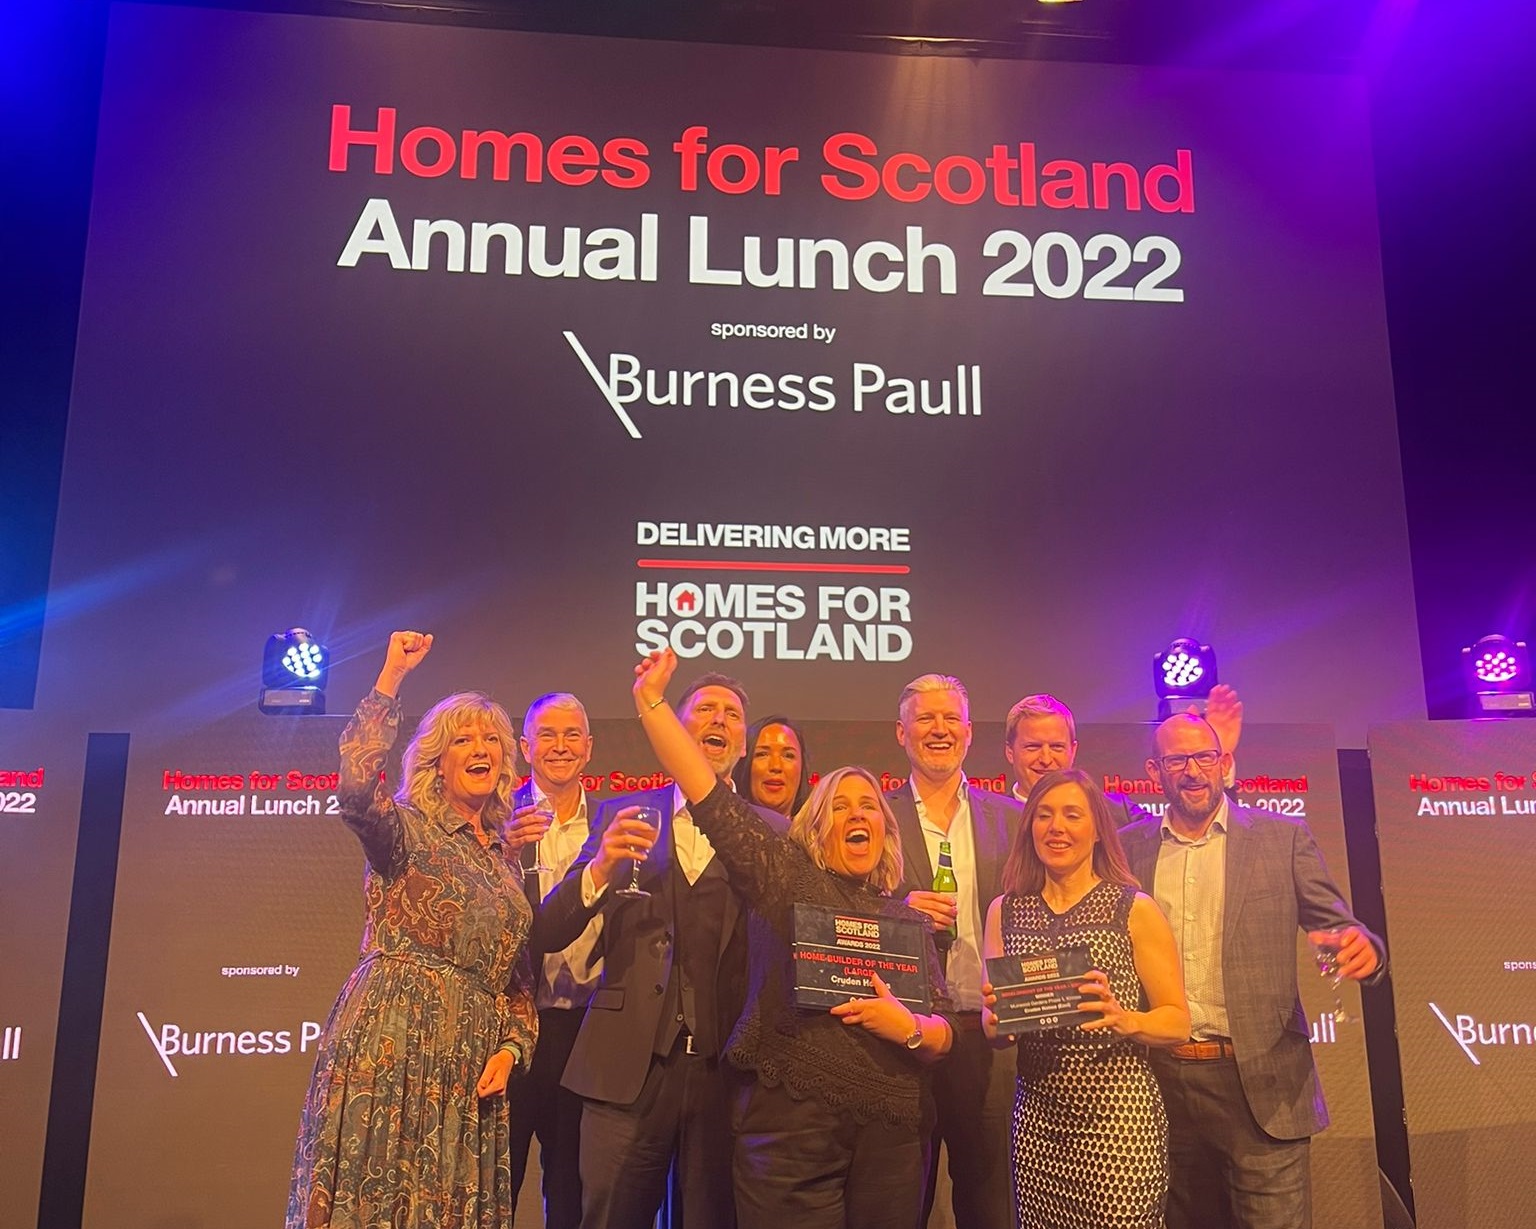 Cruden scoops double win at Homes for Scotland Awards